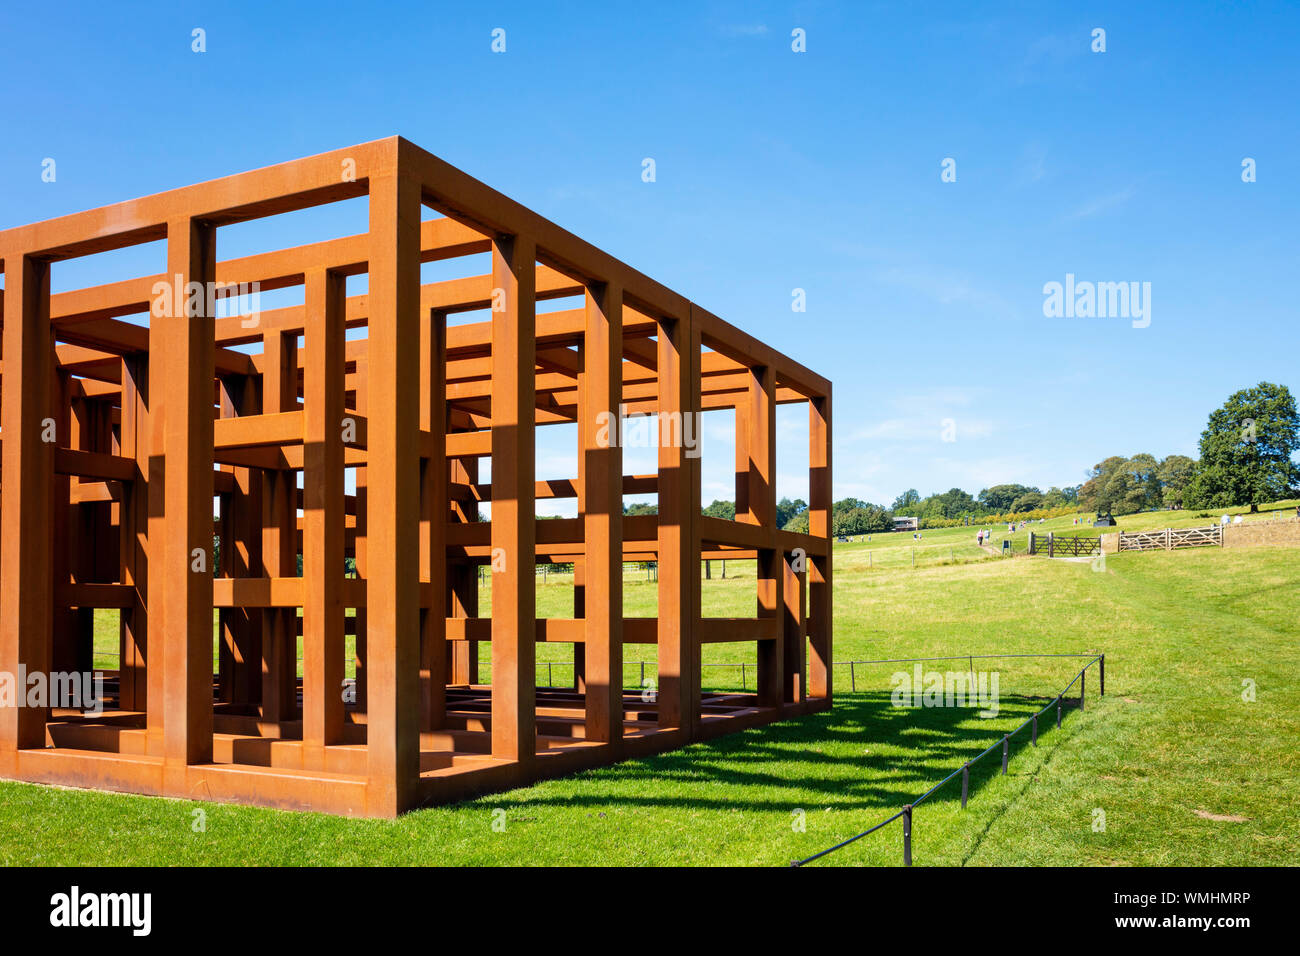 Sean Scully Crate of Air 2018 Yorkshire Sculpture Park  YSP West Bretton Wakeﬁeld Yorkshire England UK GB Europe Stock Photo